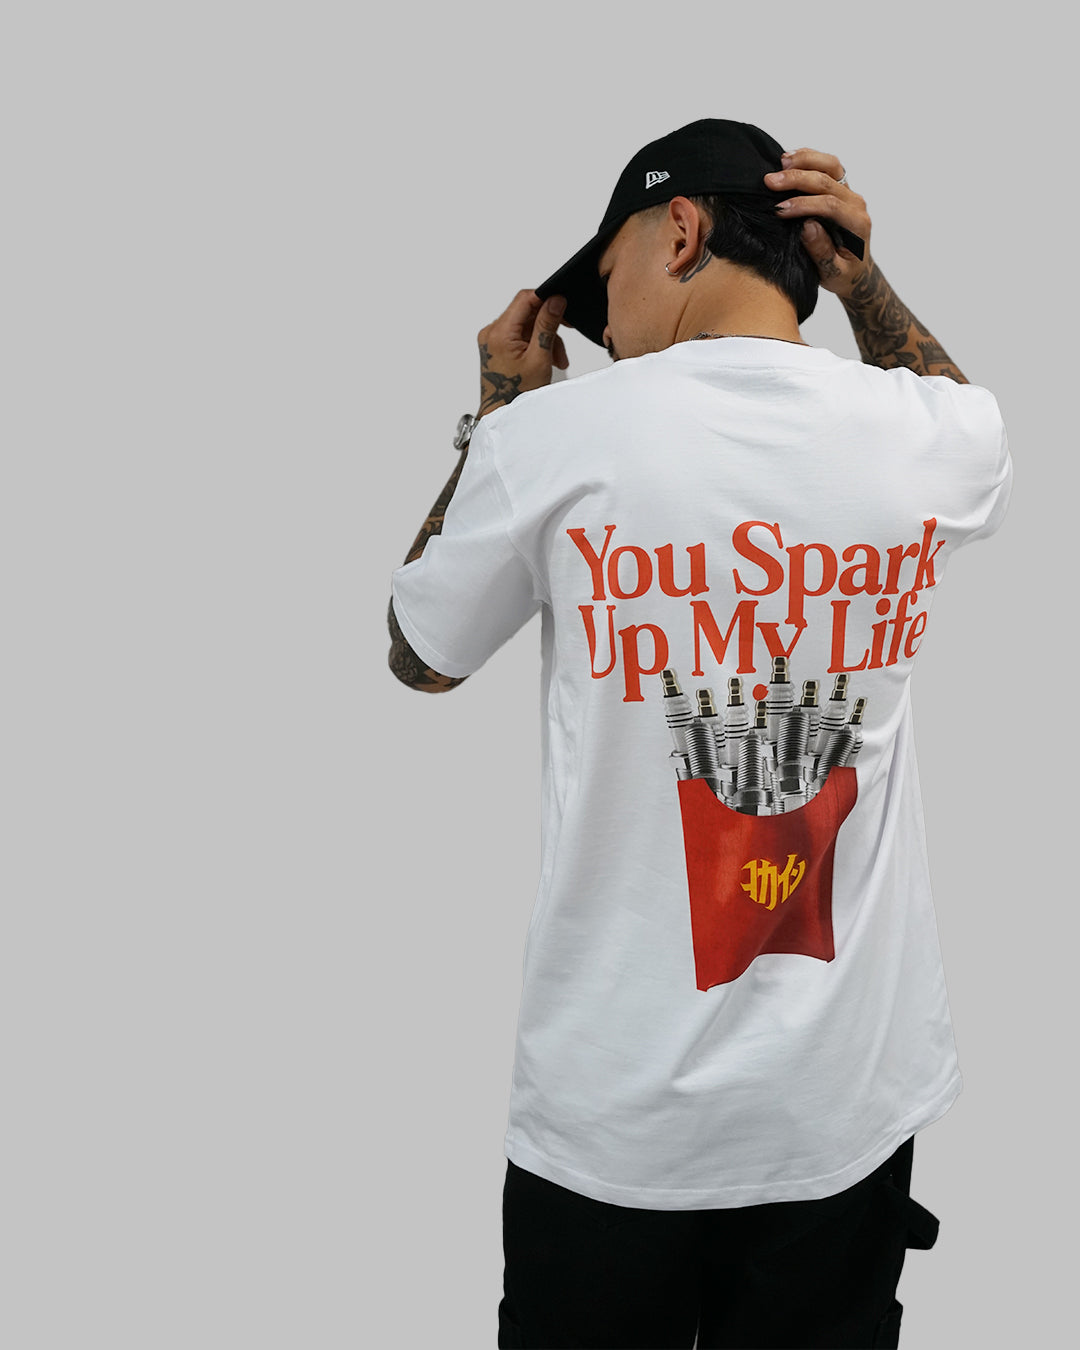 "You Spark Up My Life" T Shirt // White